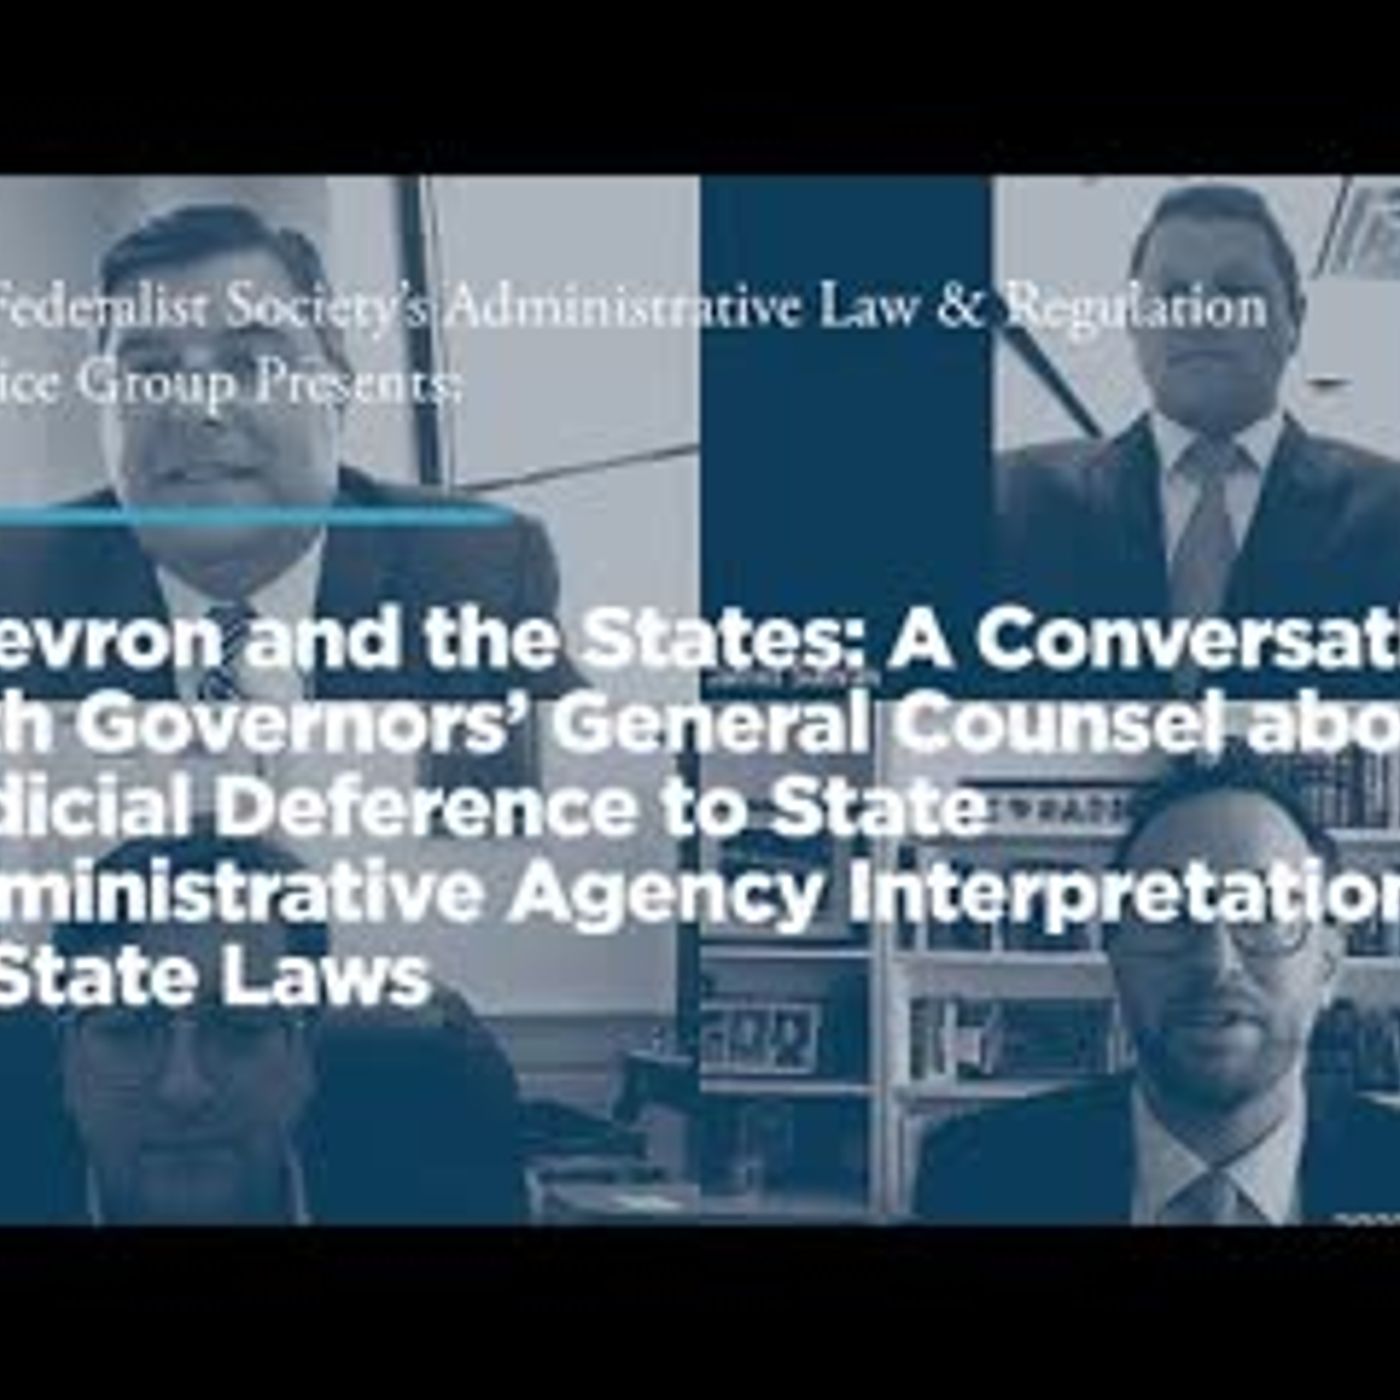 Chevron and the States: A Conversation with Governors' General Counsel about Judicial Deference to State Administrative Agency Interpretatio